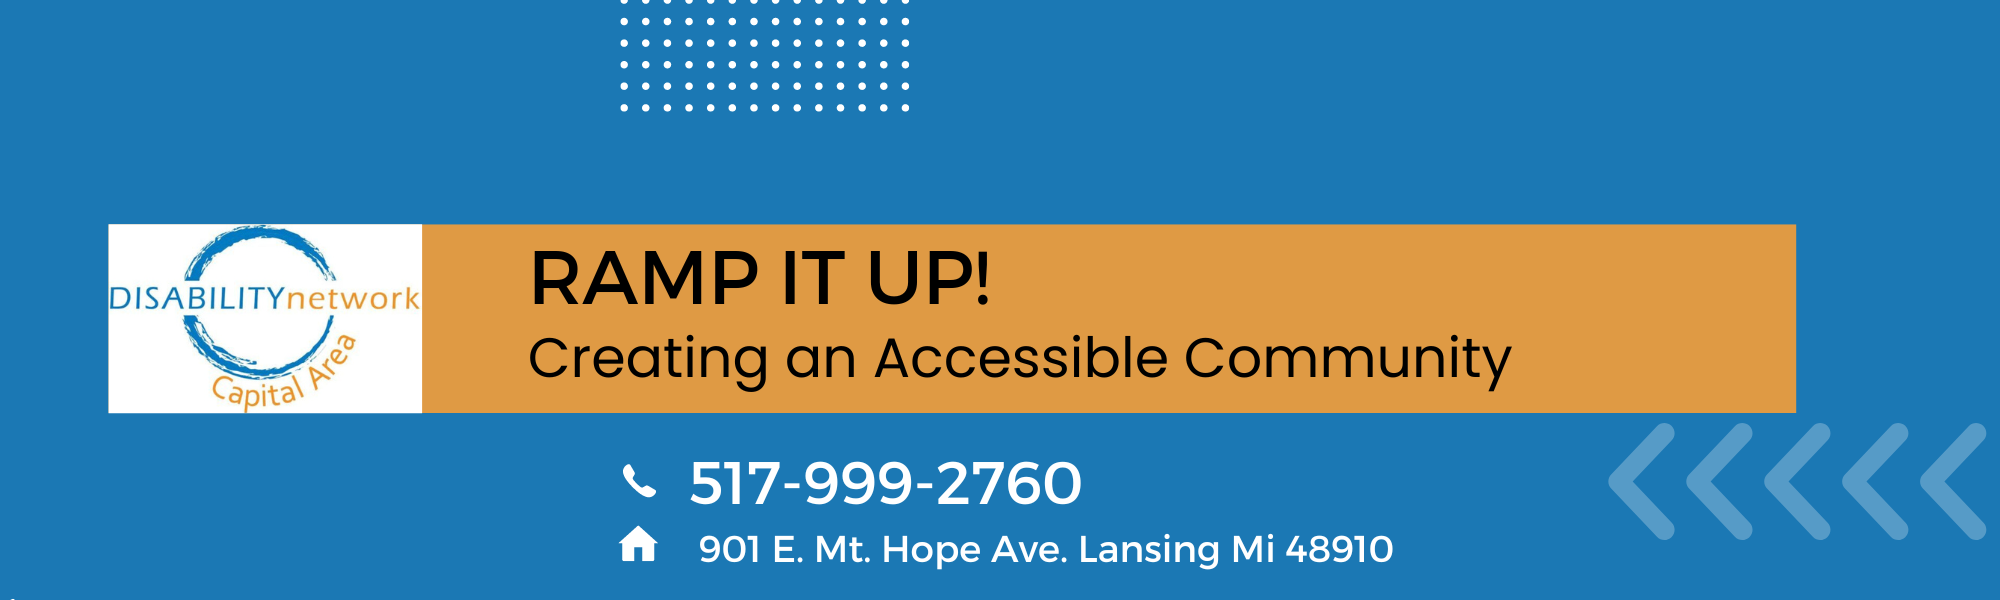 RAMP IT UP! Creating an Accessible Community 5179992760 901 E Mt Hope Ave Lansing Mi 48910